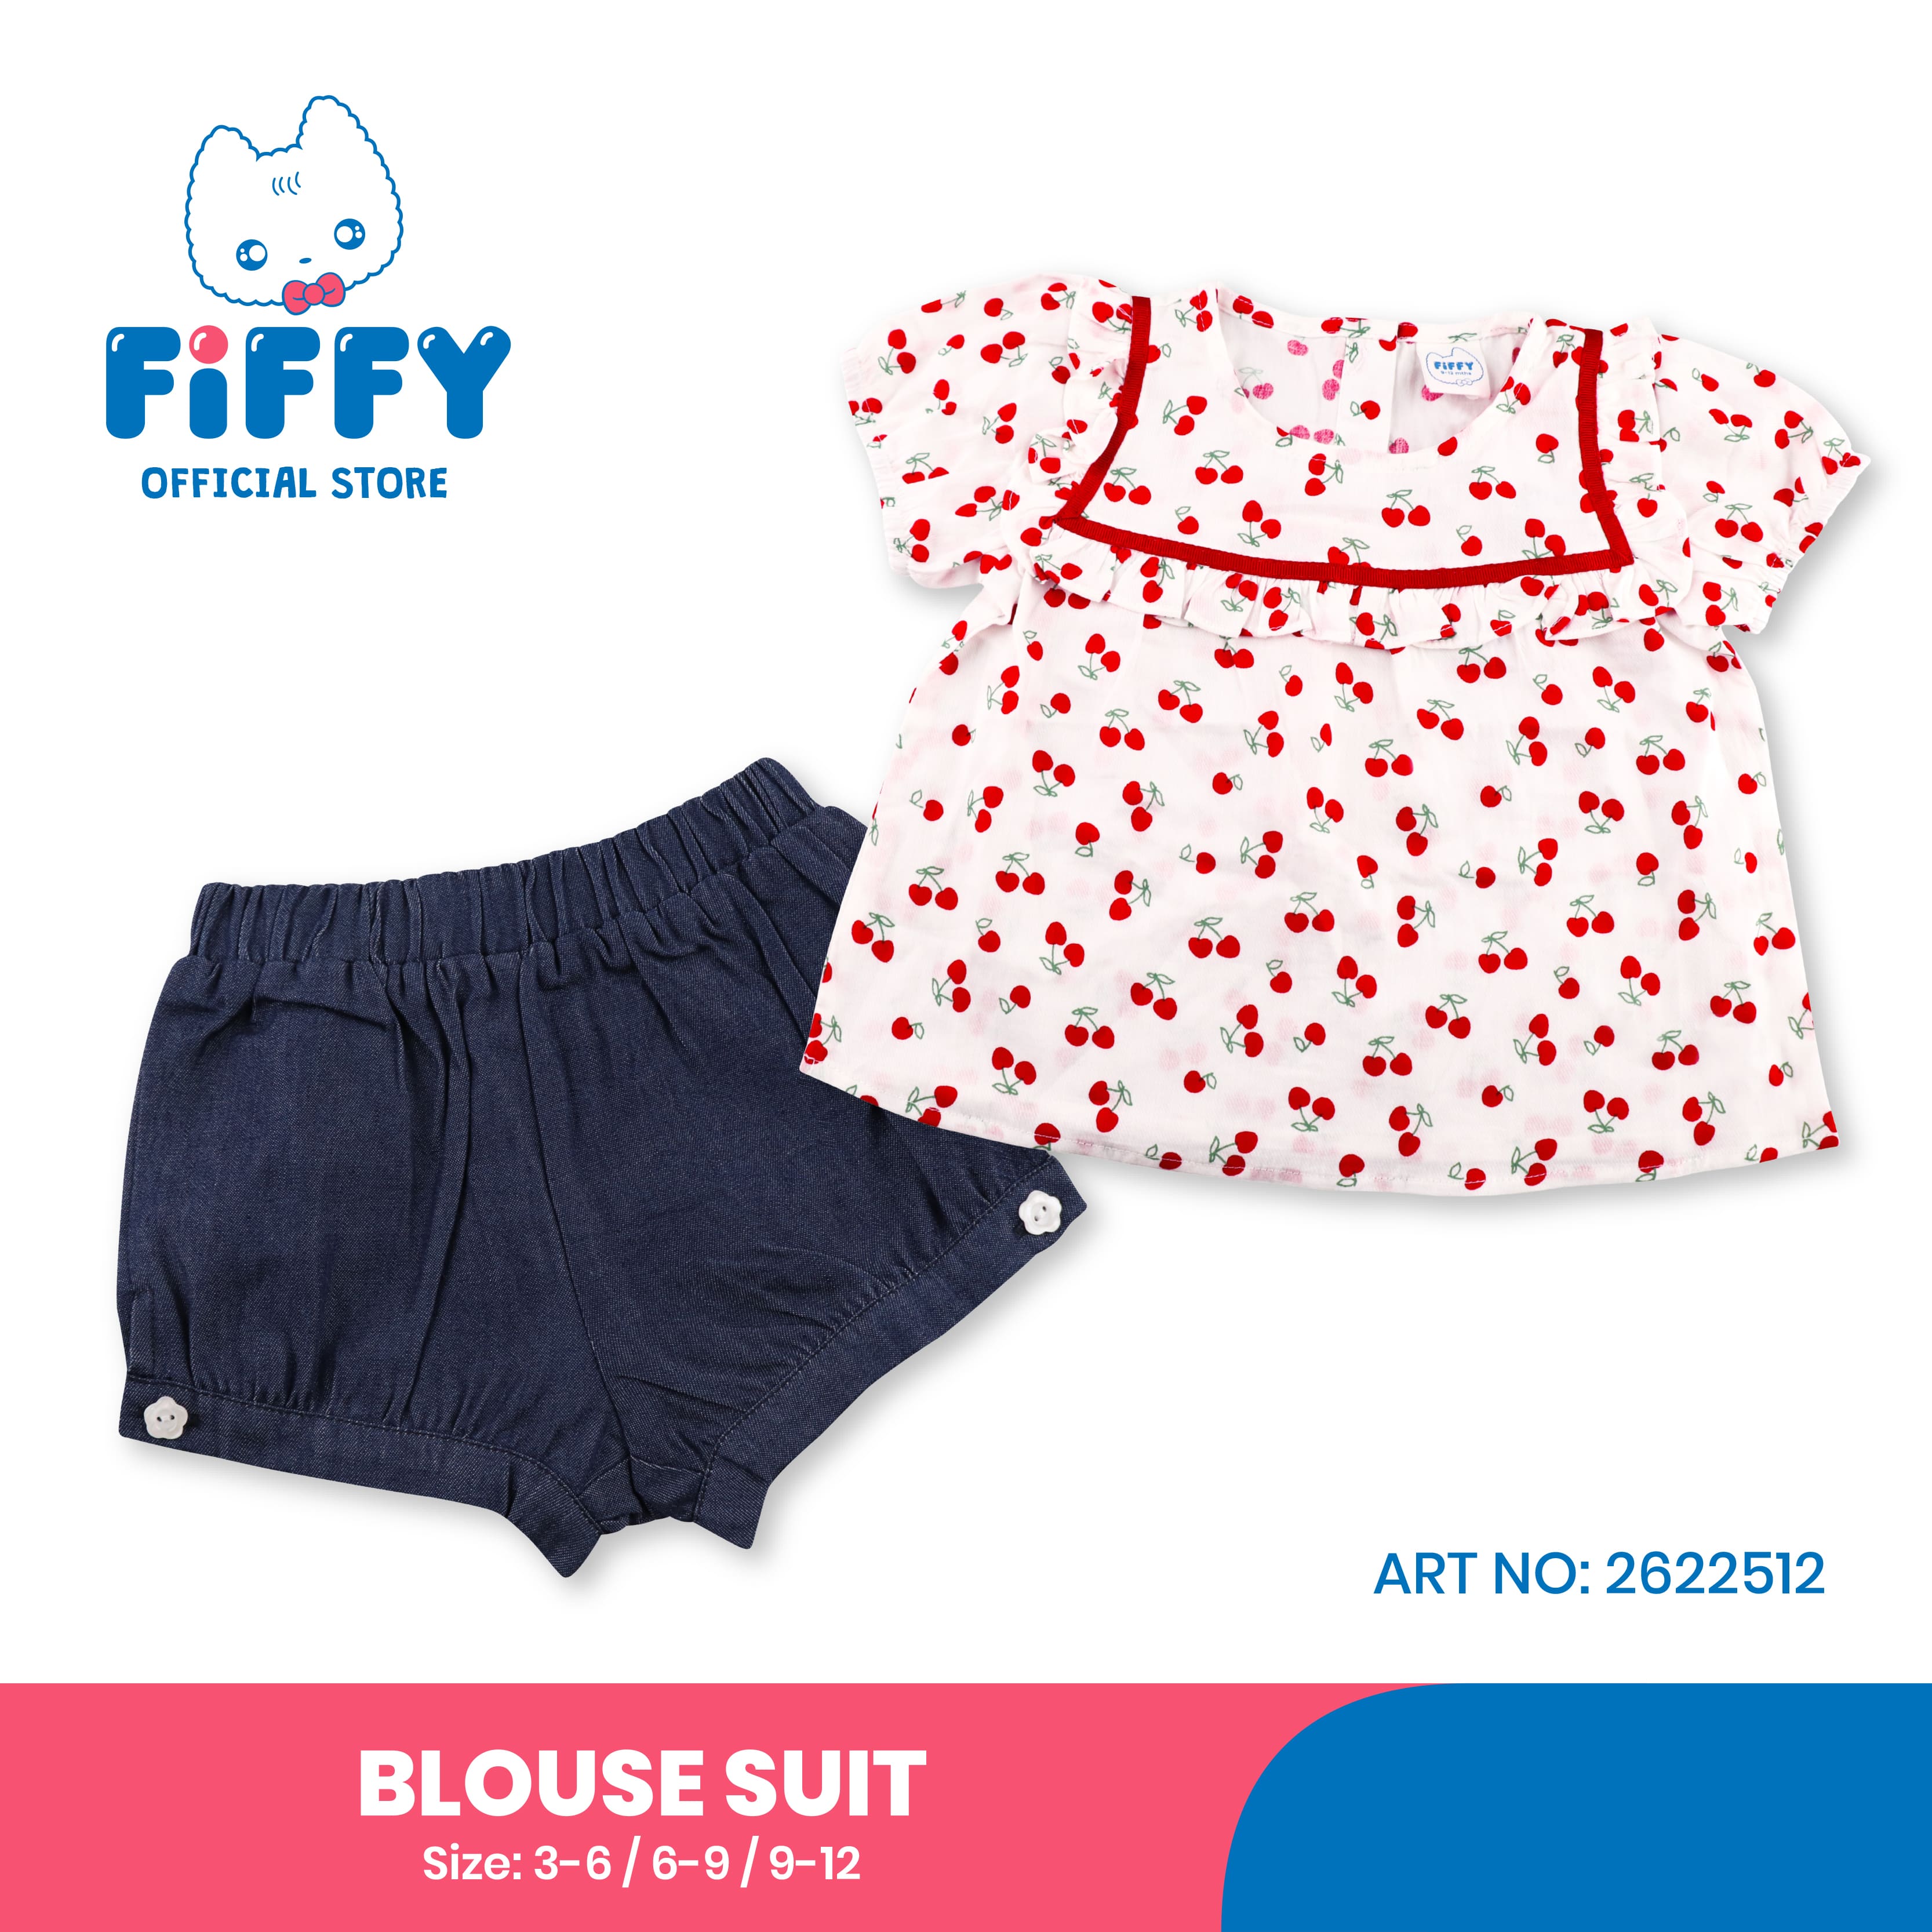 FIFFY HOT DAY BLOUSE SUIT